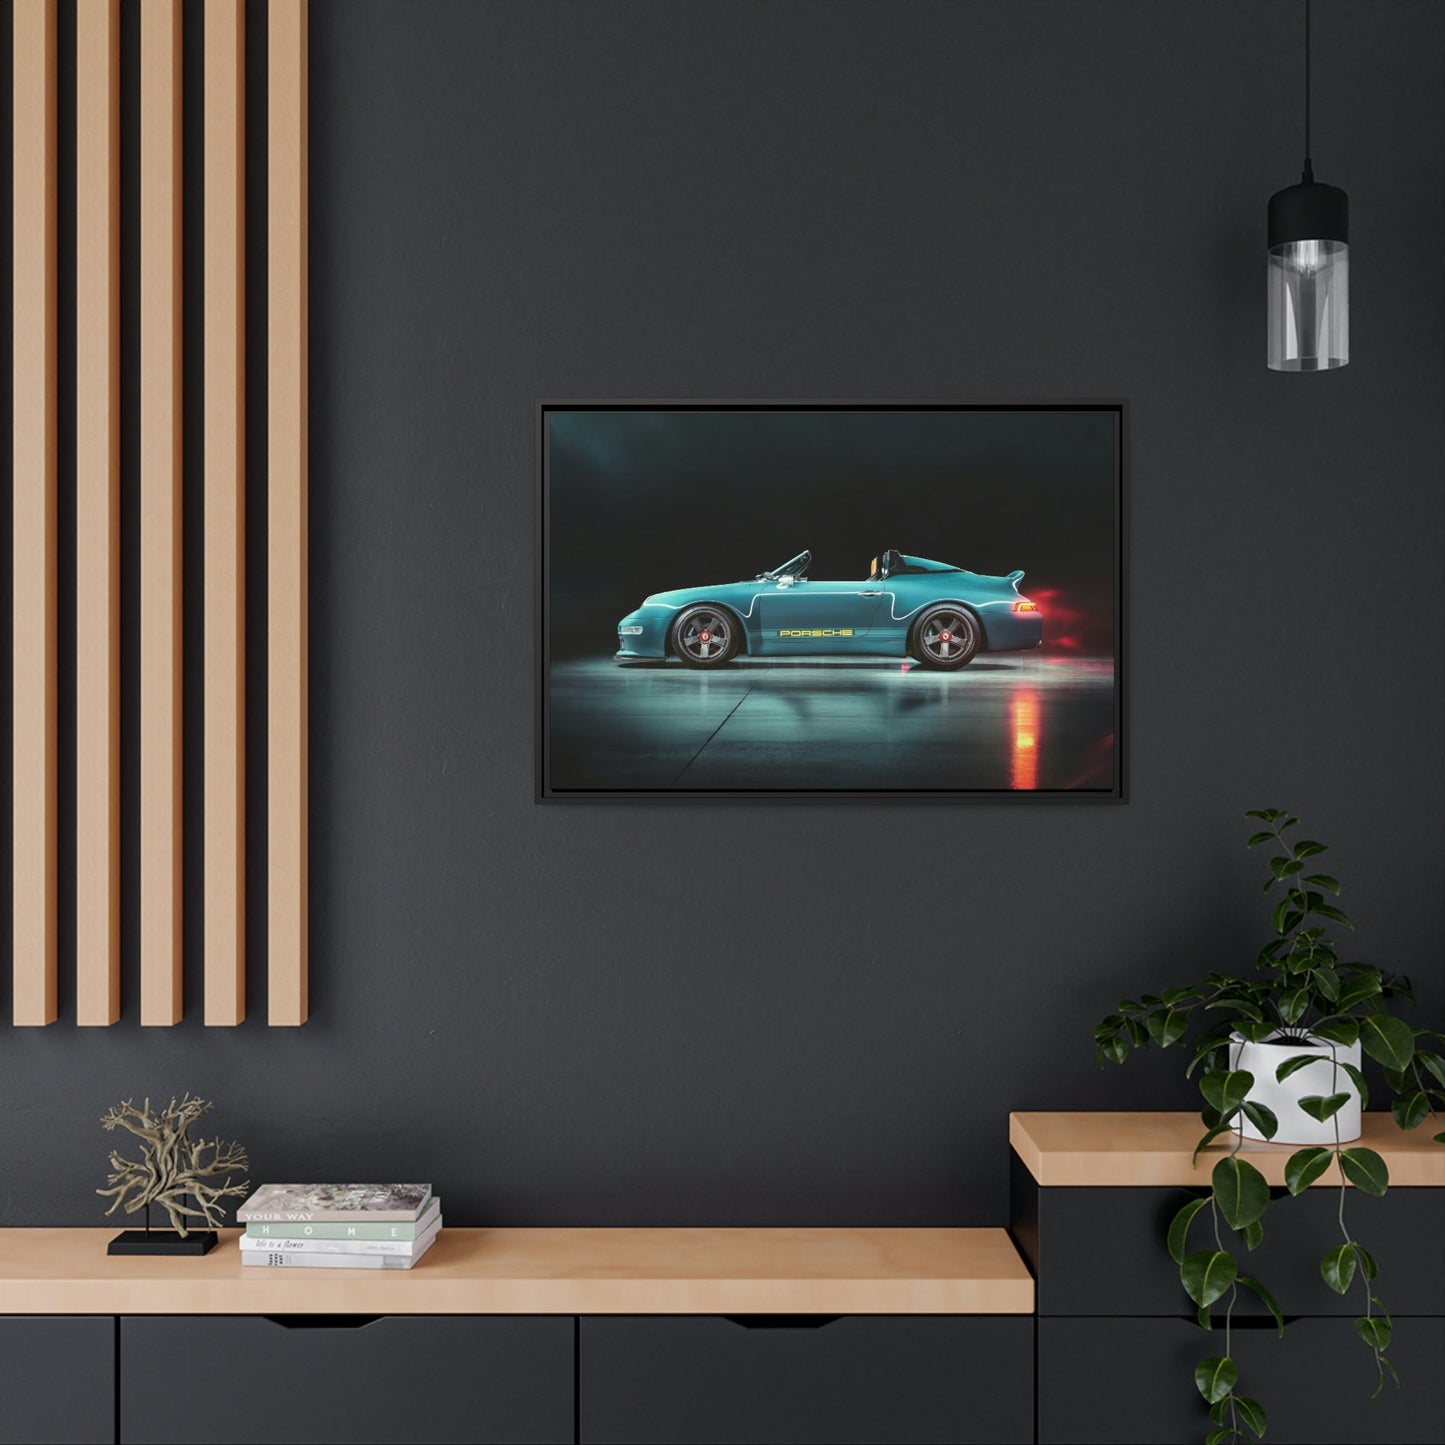 Porsche Passion: A Work of Art for Fans of This Iconic Sports Car